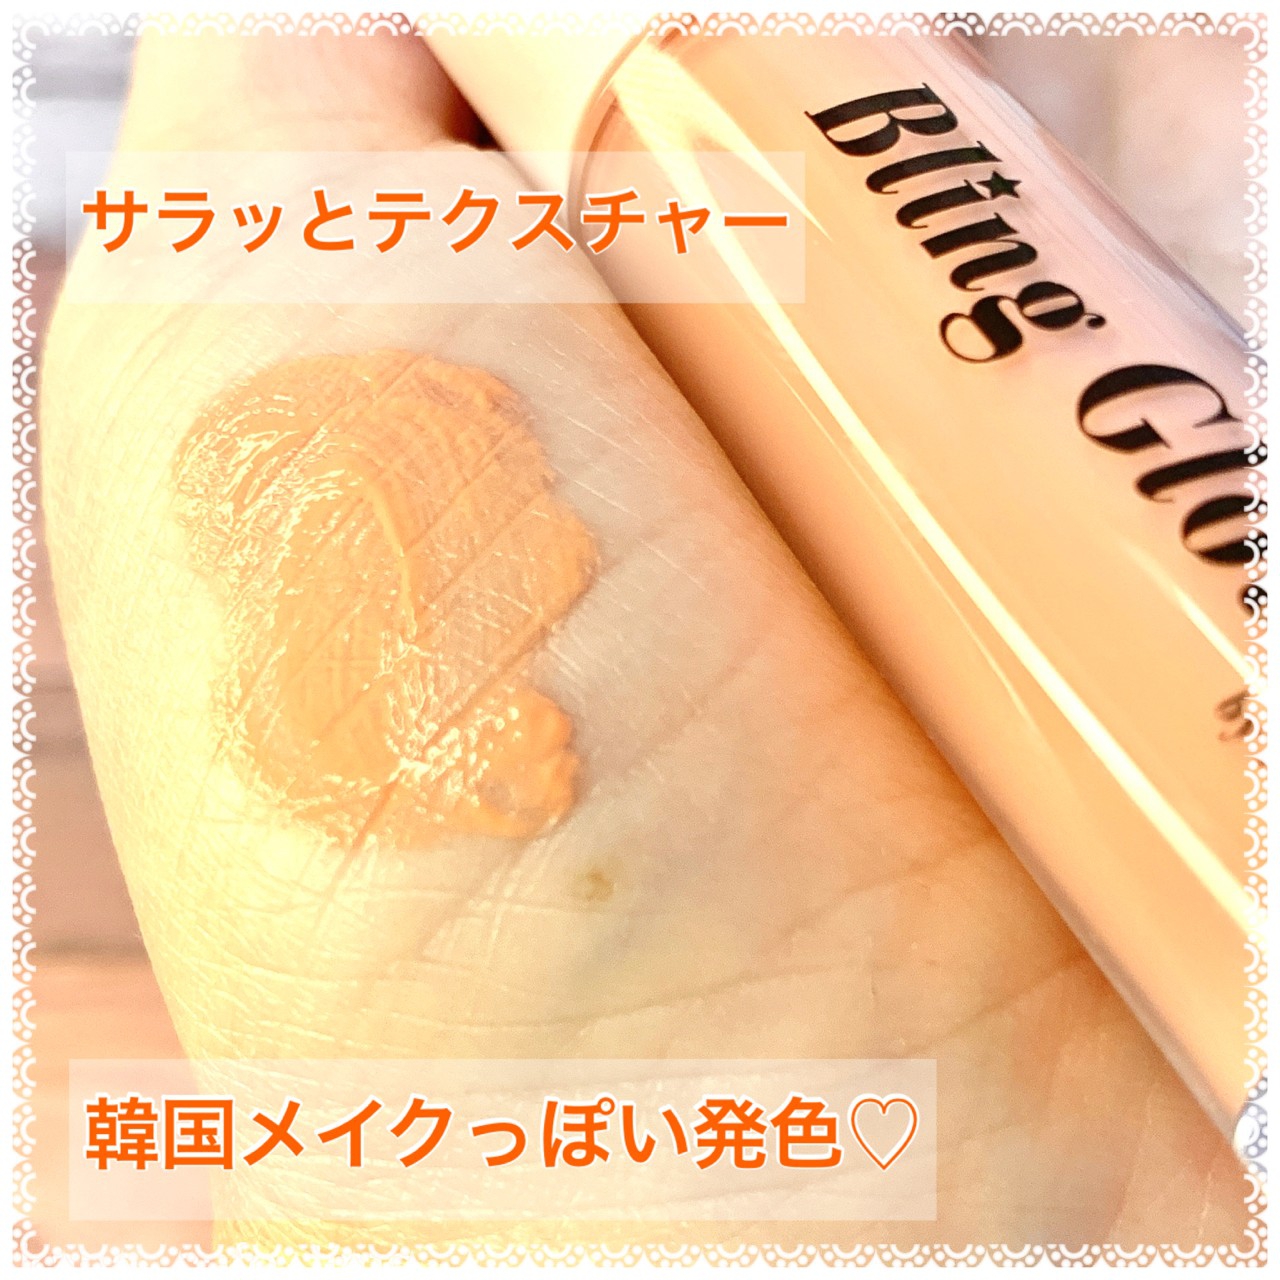 Bling Glow グローリキッドクリームチークを使ったkana_cafe_timeさんのクチコミ画像3